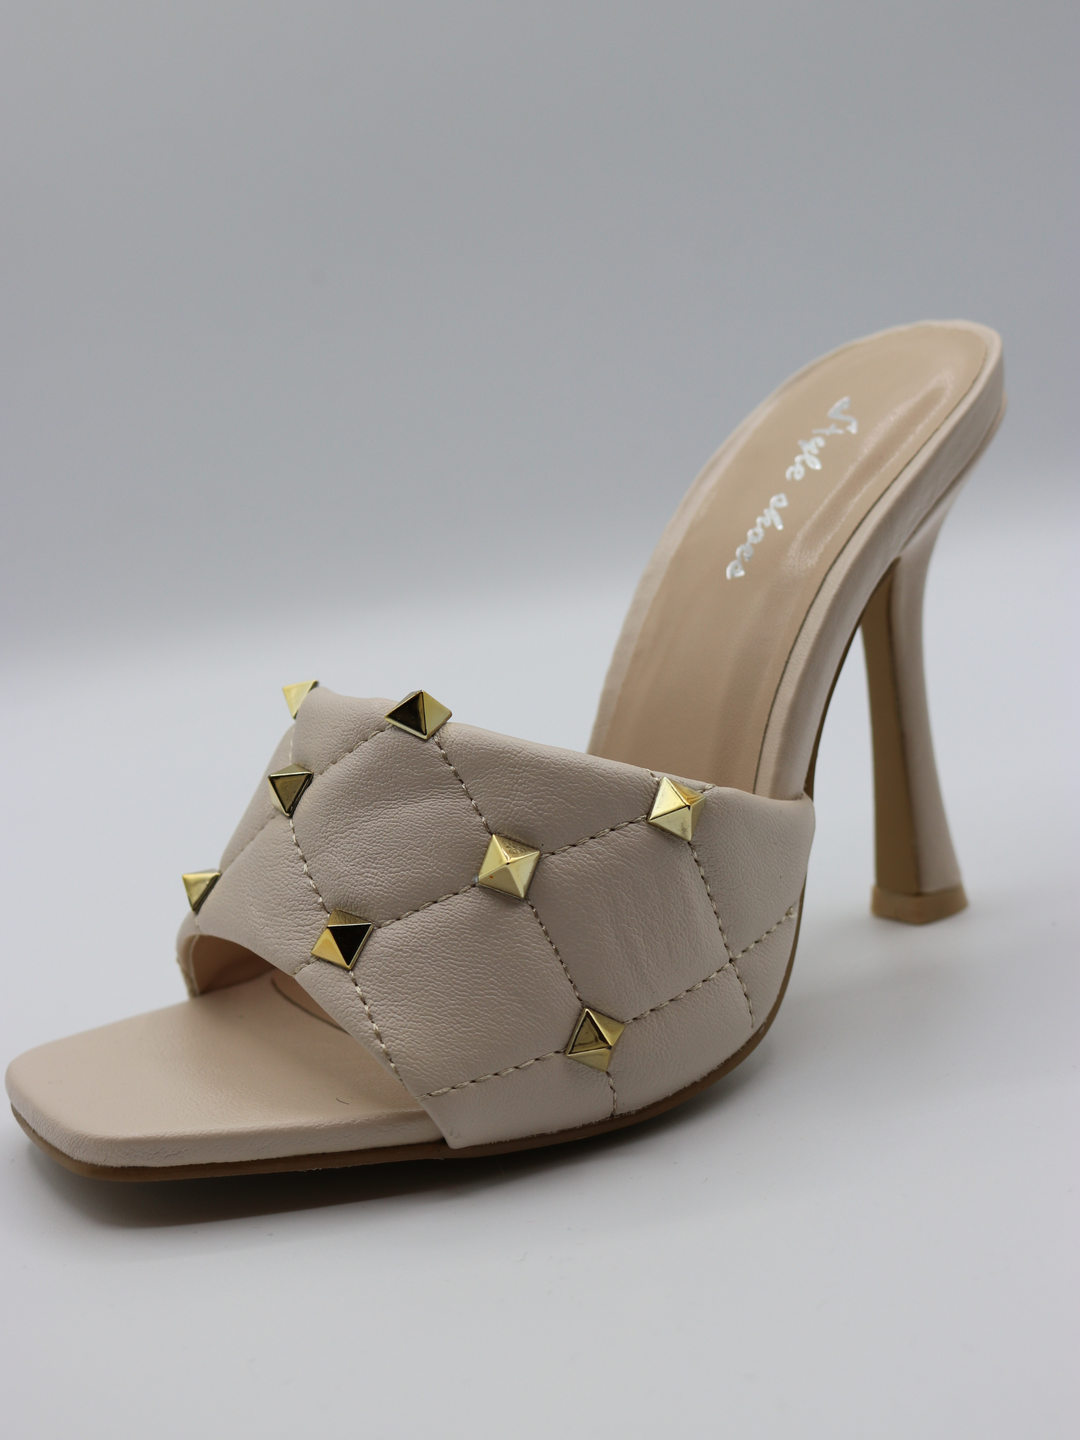 Cream quilted faux leather mule heels with gold studded heels. Photo shows the shoes from the side. The gold studded detailing is visible. 